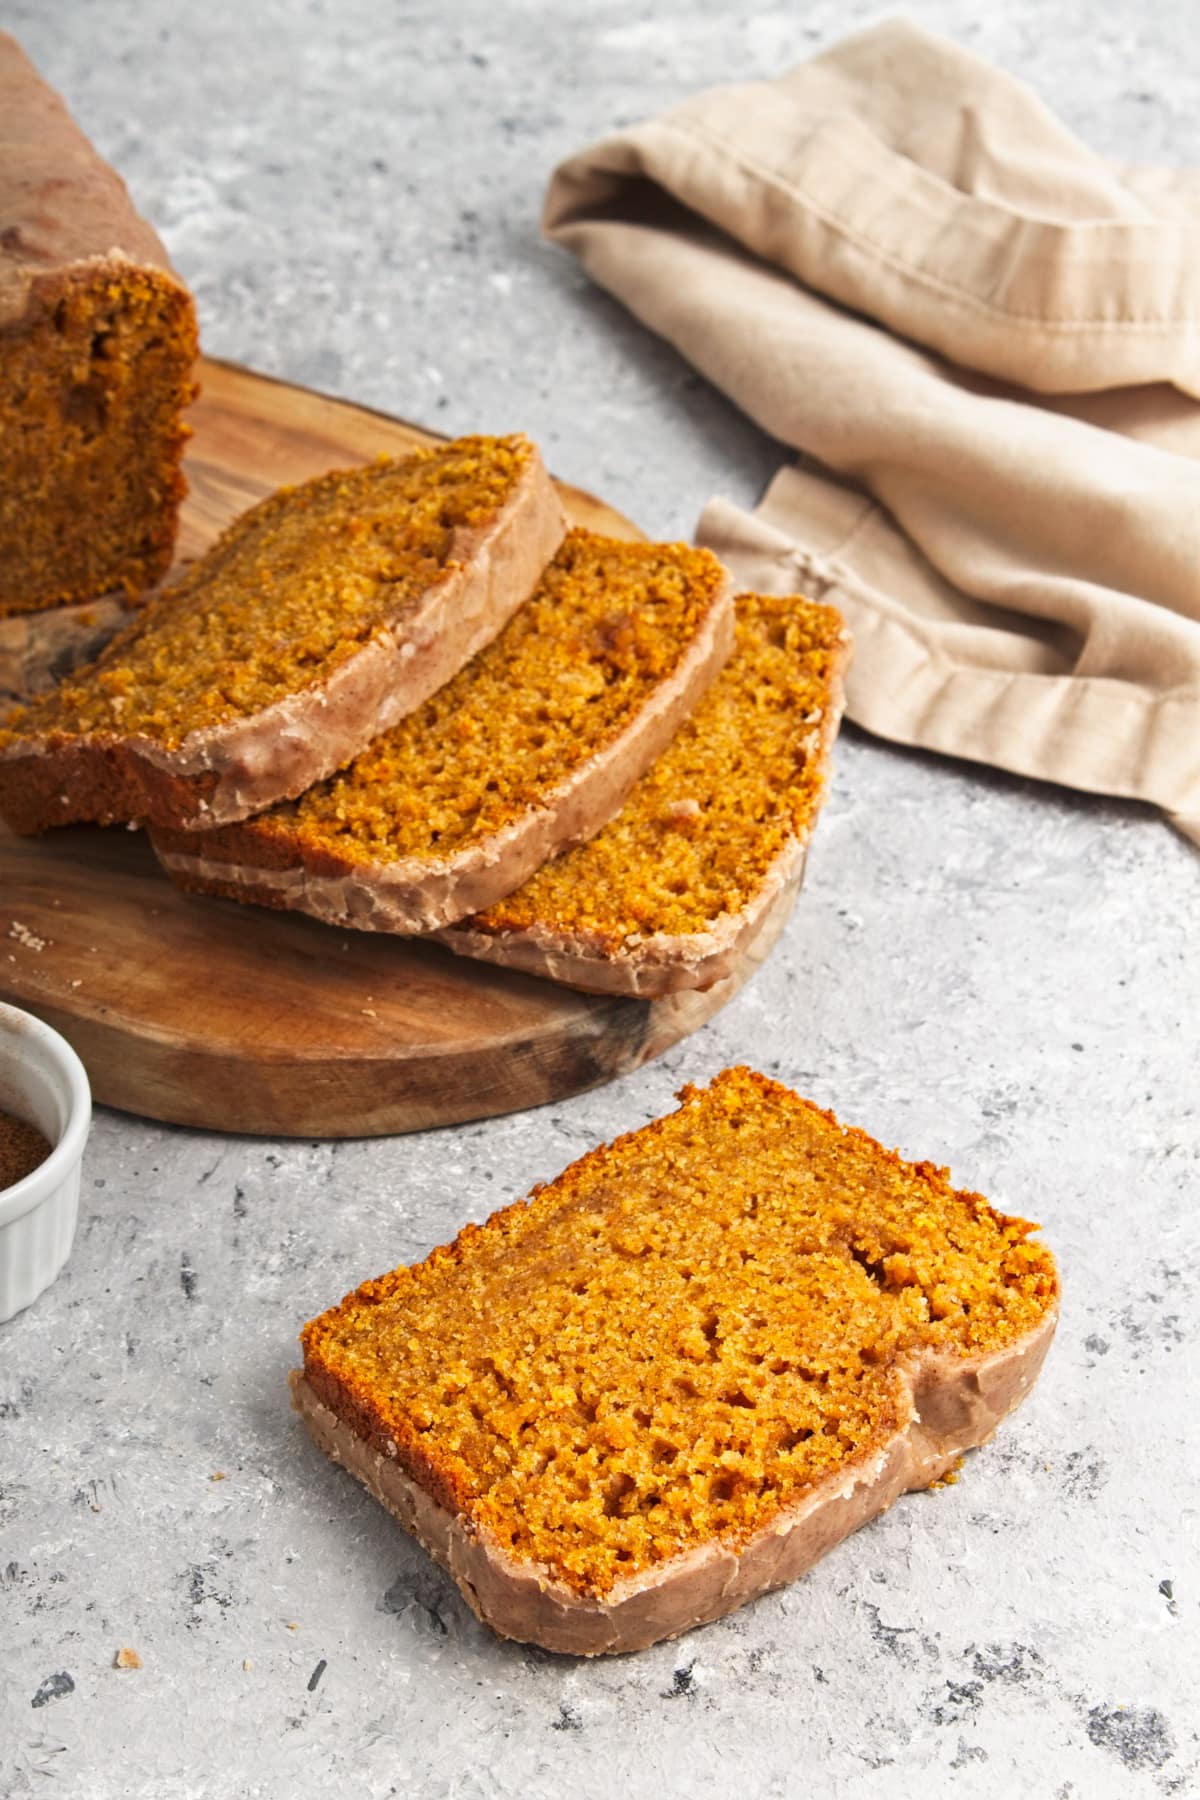 Slices of pumpkin loaf with a fluffy texture.